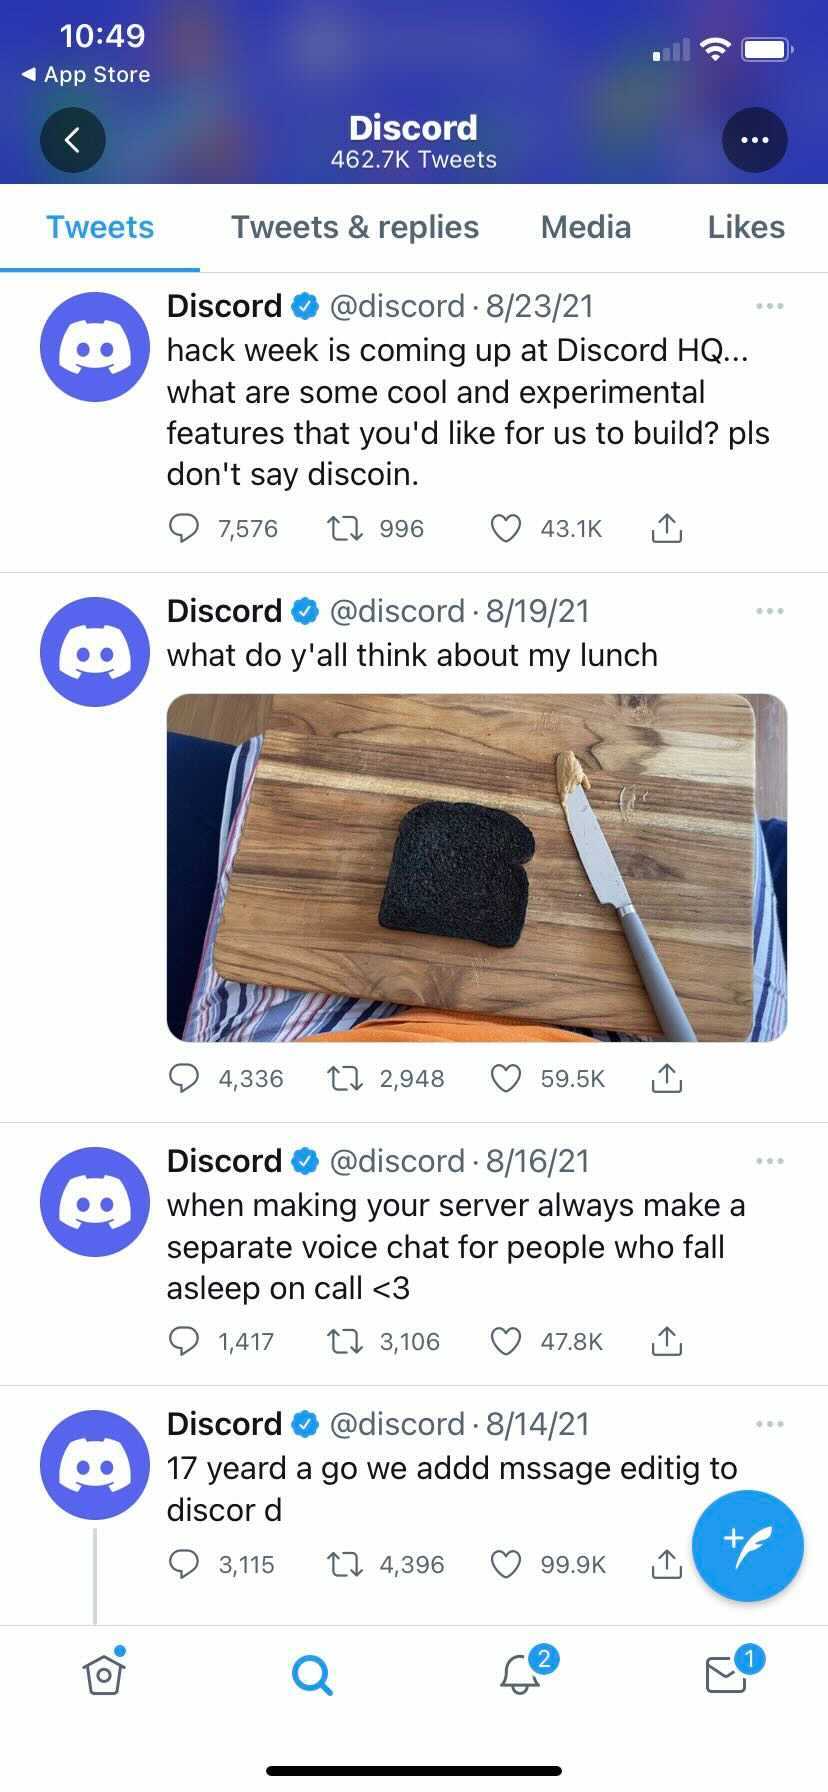 Discord's Twitter feed.